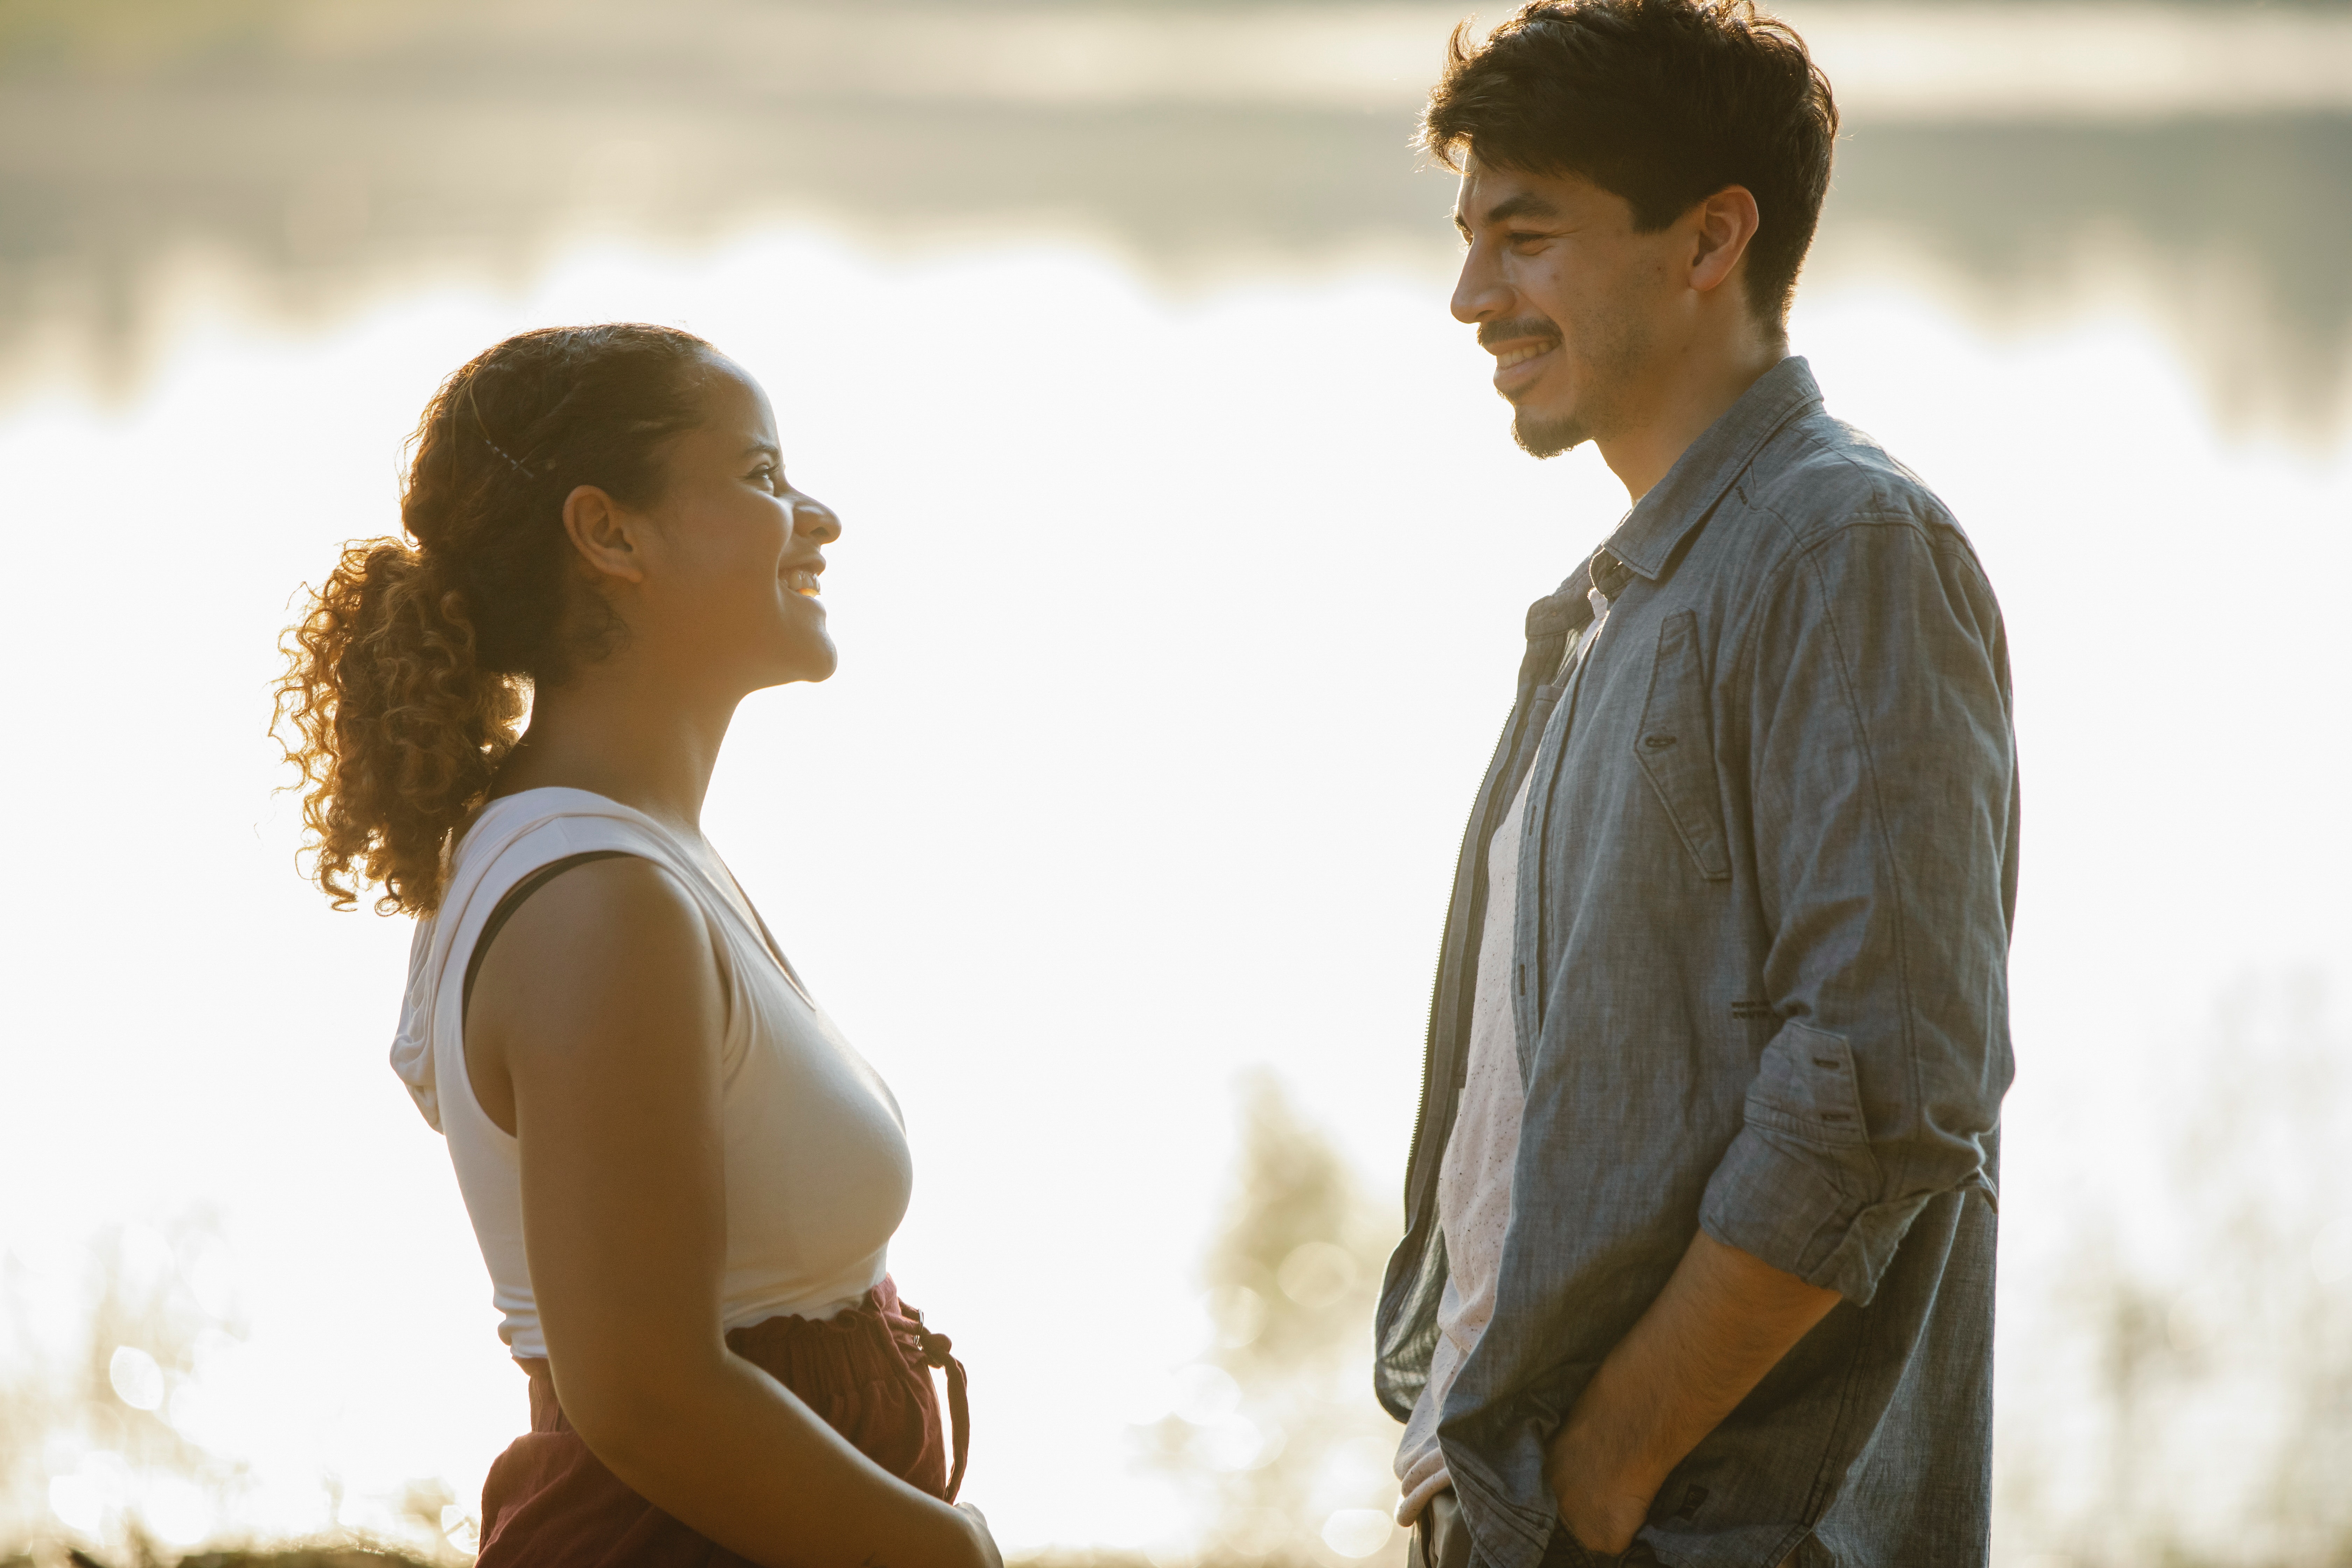 An attractive man and woman talk while smiling. They are relaxed and standing in front of a lake.